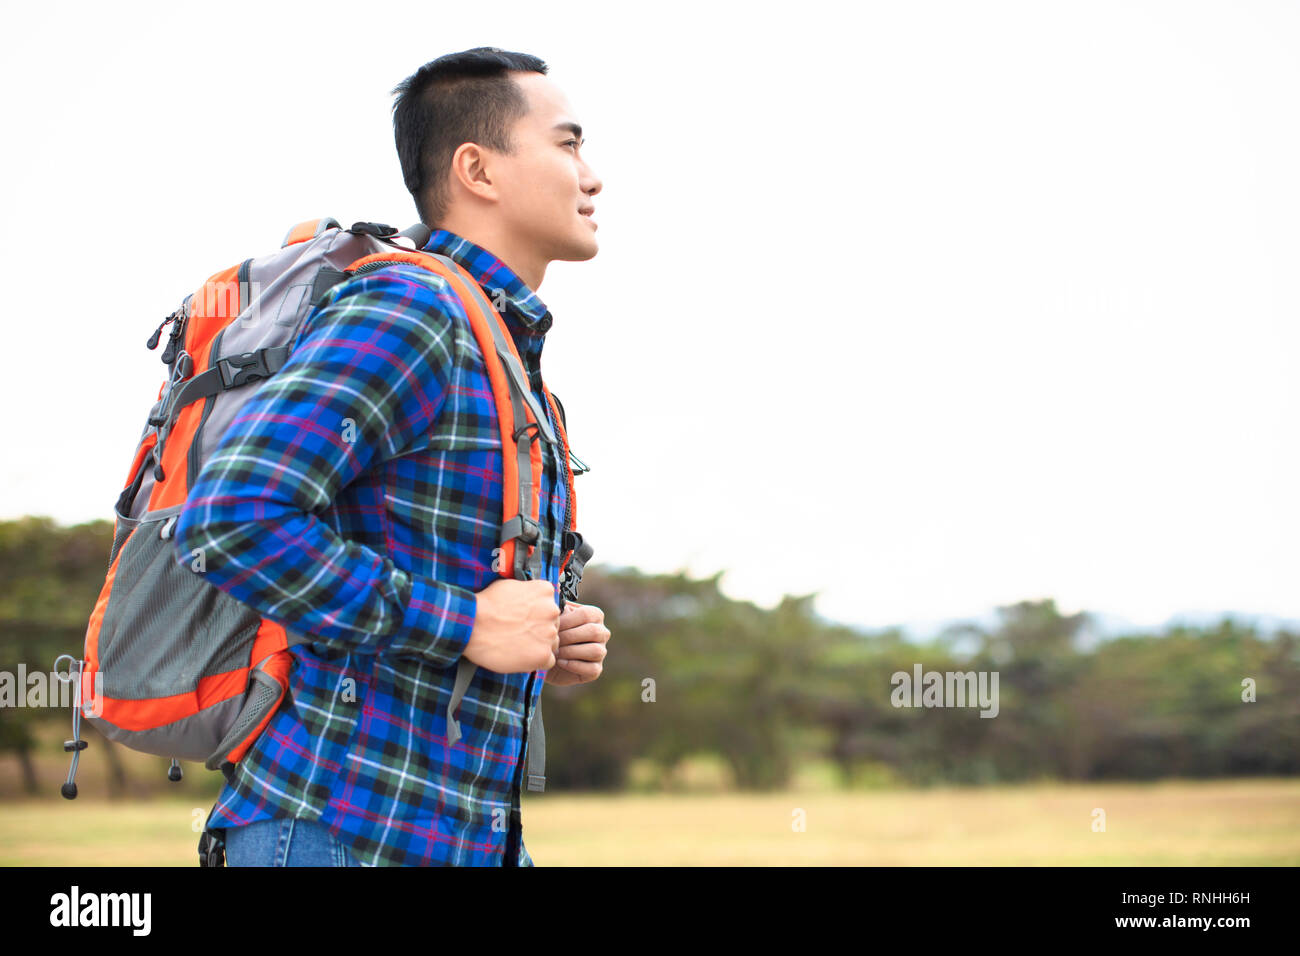 Traveler young Man with backpack looking forward Stock Photo